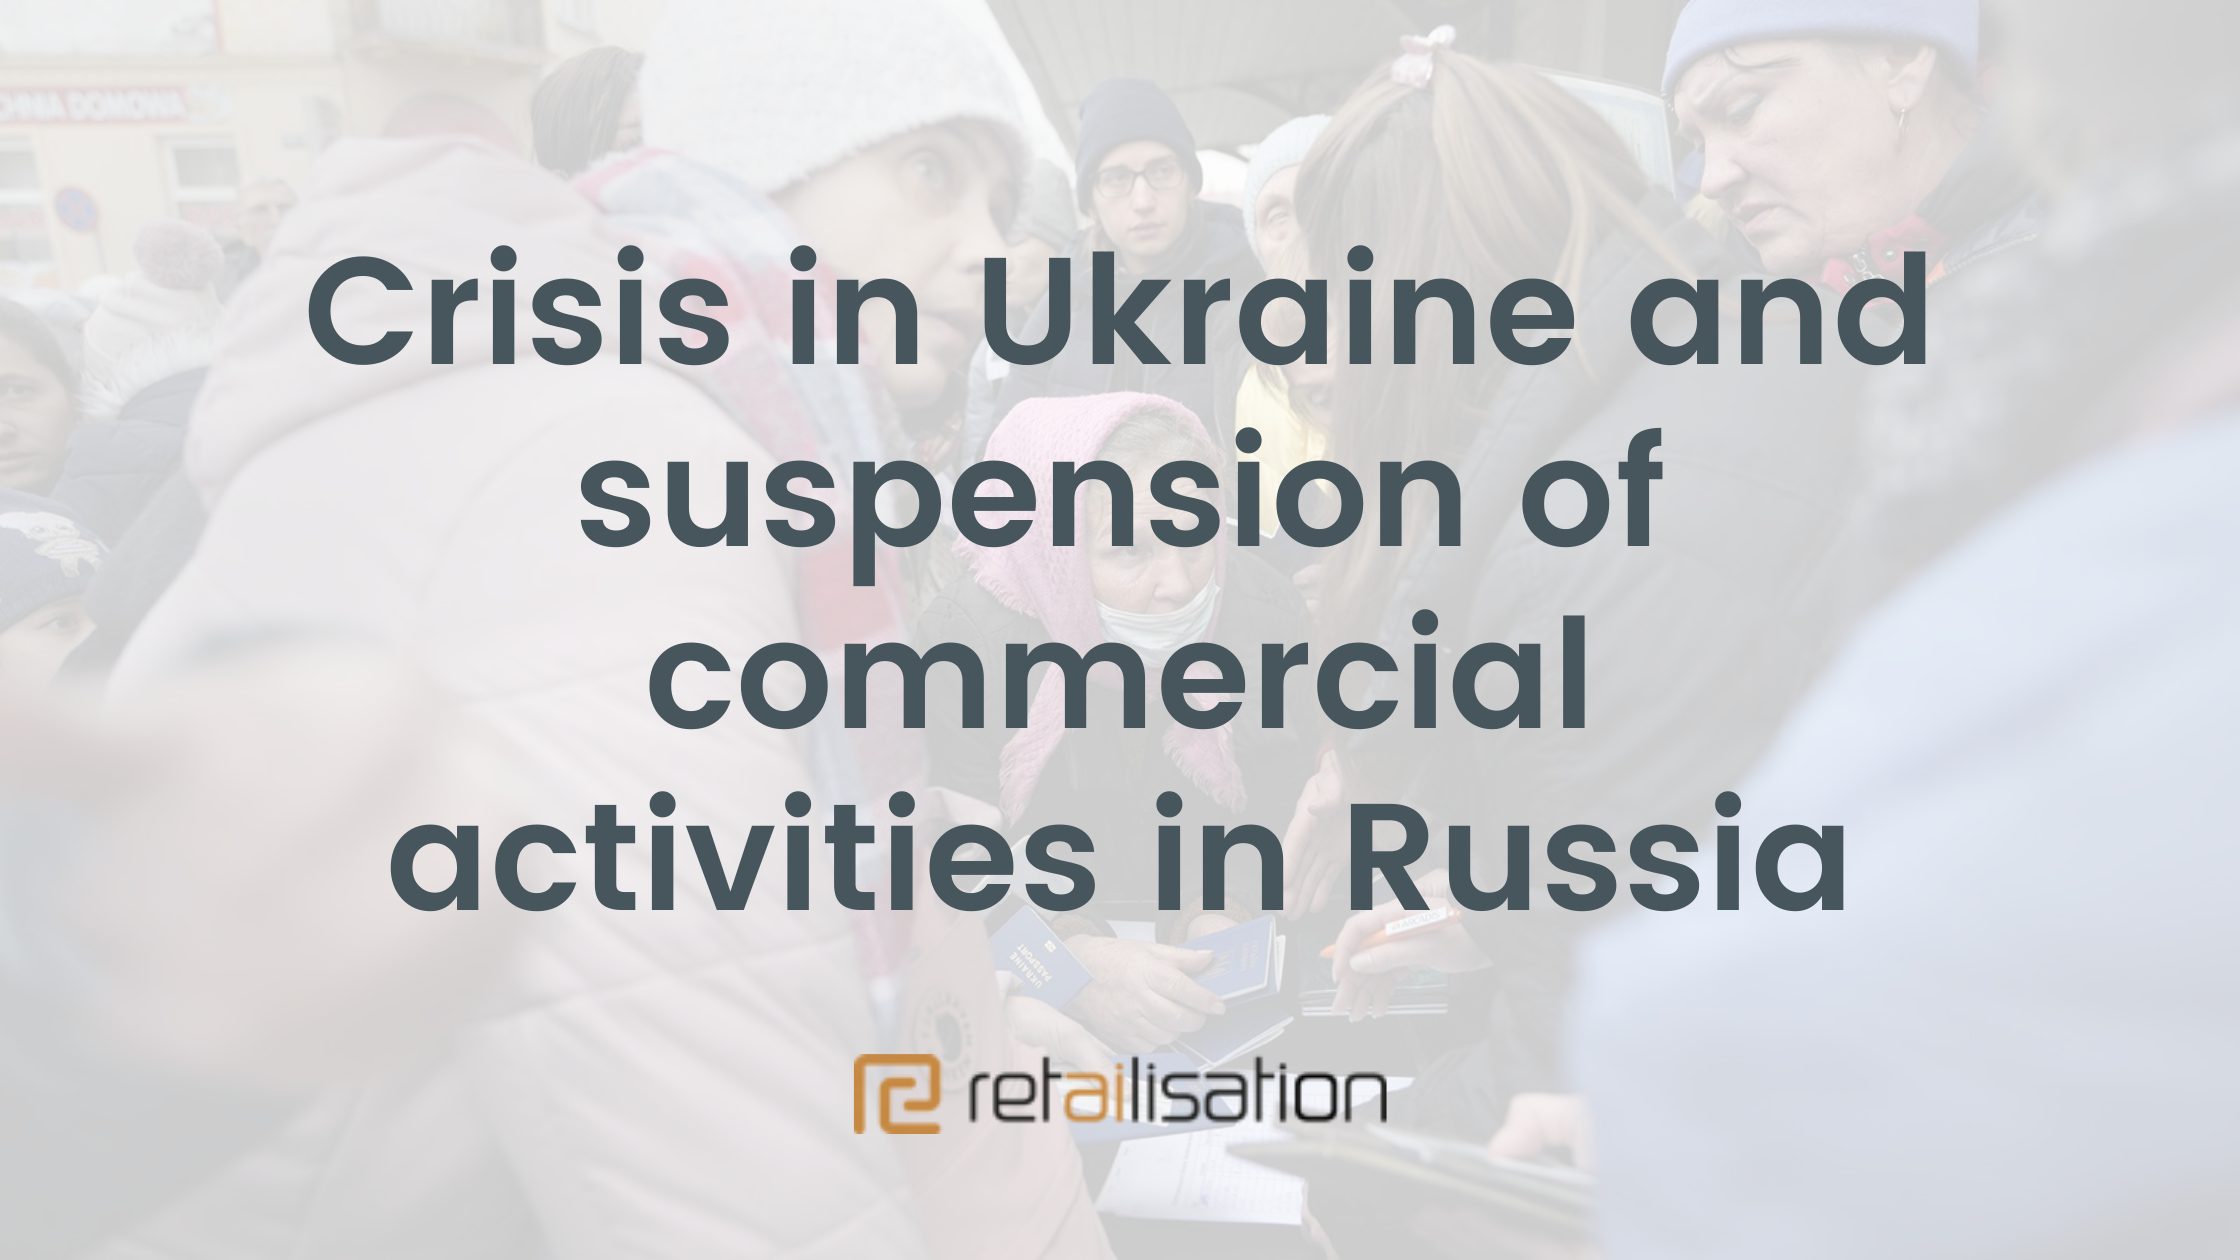 Crisis in Ukraine and suspension of commercial activities in Russia